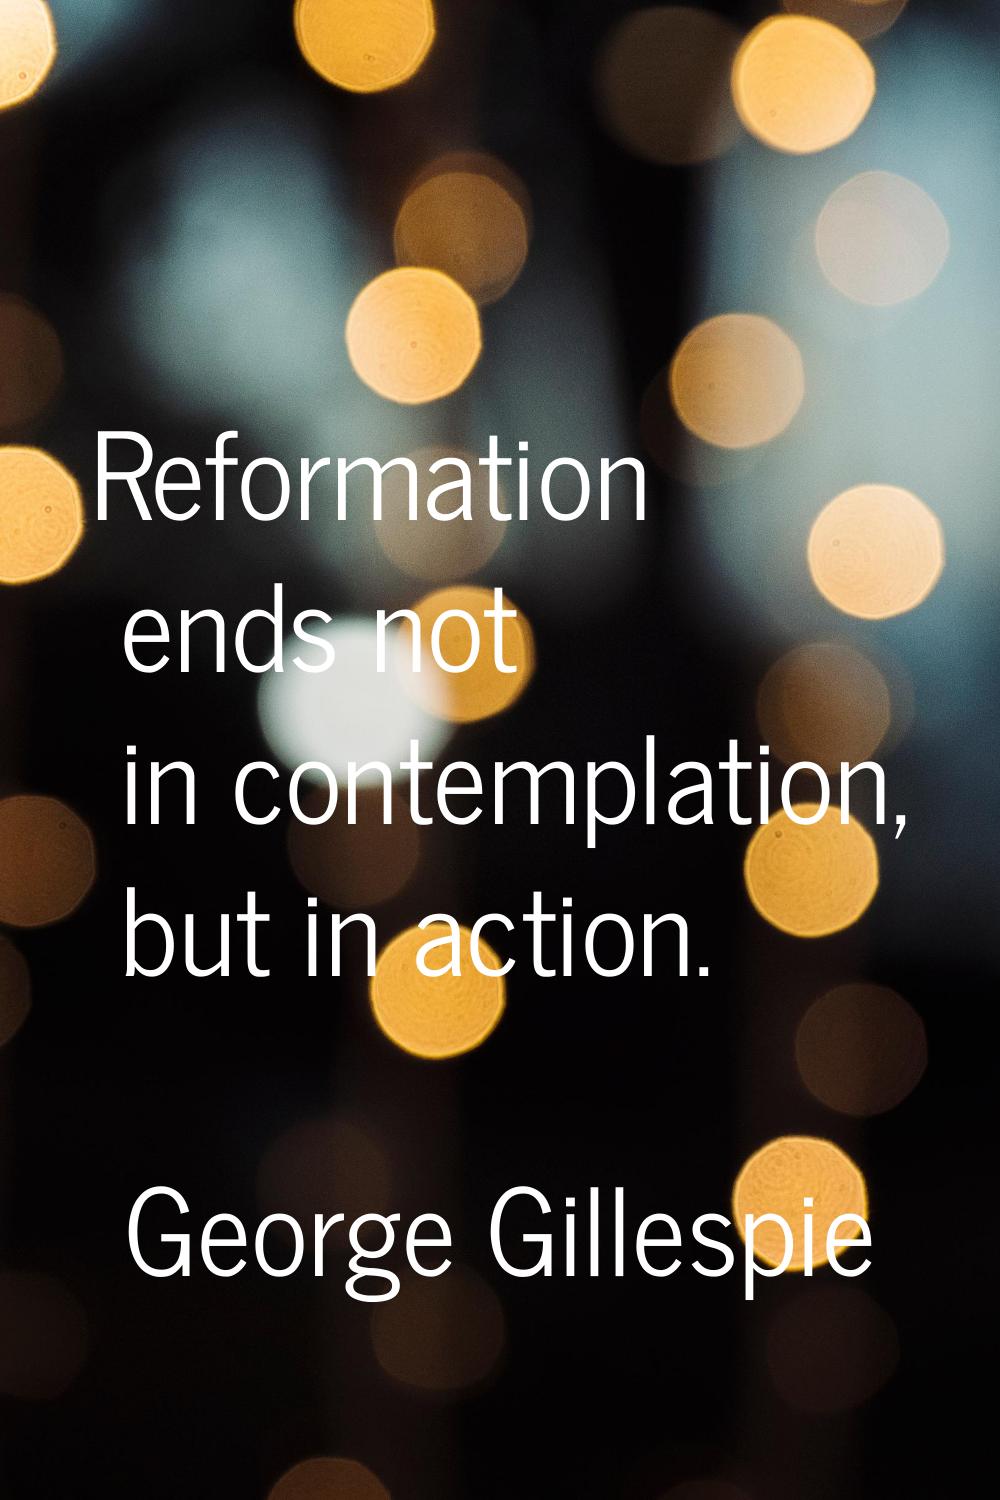 Reformation ends not in contemplation, but in action.